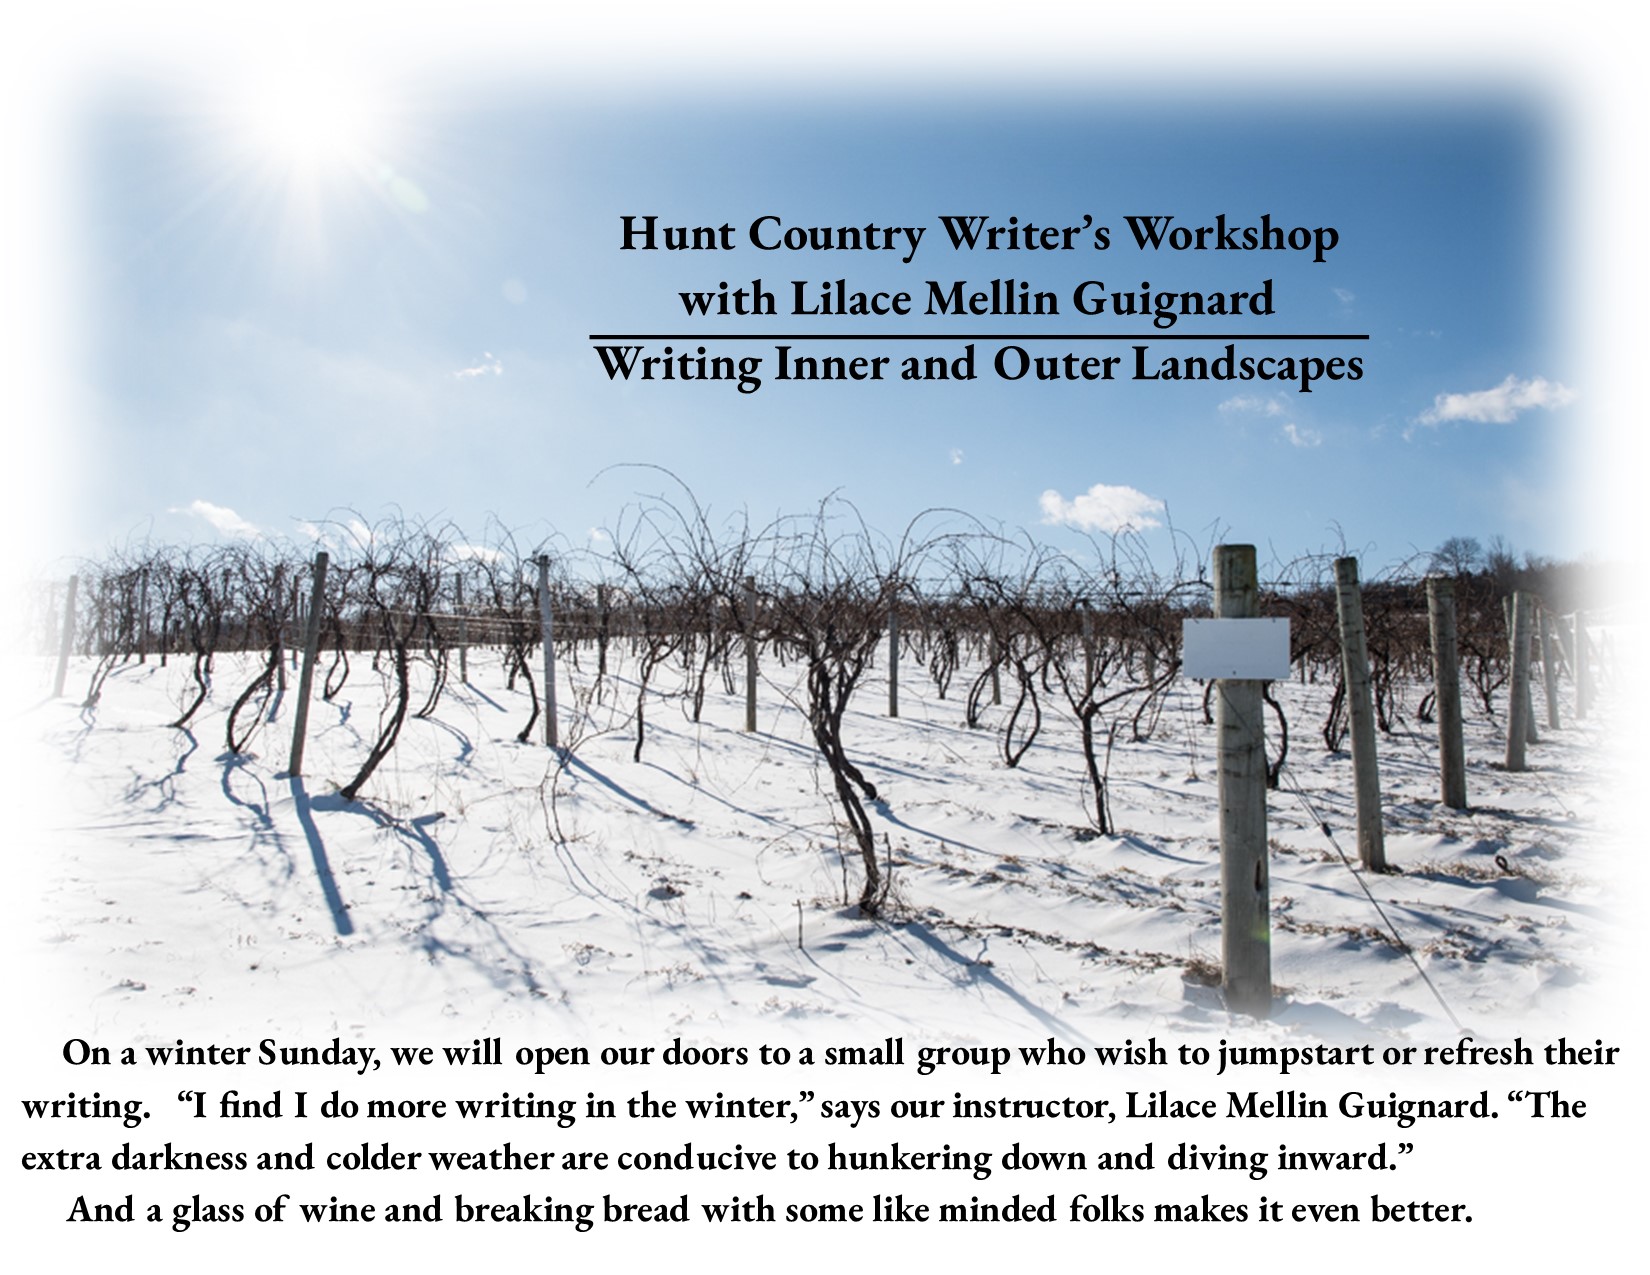 Winter vineyard scenery with text: Hunt Country Writer’s Workshop Writing Inner and Outer Landscapes On a winter Sunday, we will open our doors to a small group who wish to jumpstart or refresh their writing. “I find I do more writing in the winter,” says our instructor, Lilace Mellin Guignard. “The extra darkness and colder weather are conducive to hunkering down and diving inward.” And a glass of wine and breaking bread with like minded folks makes it even better.